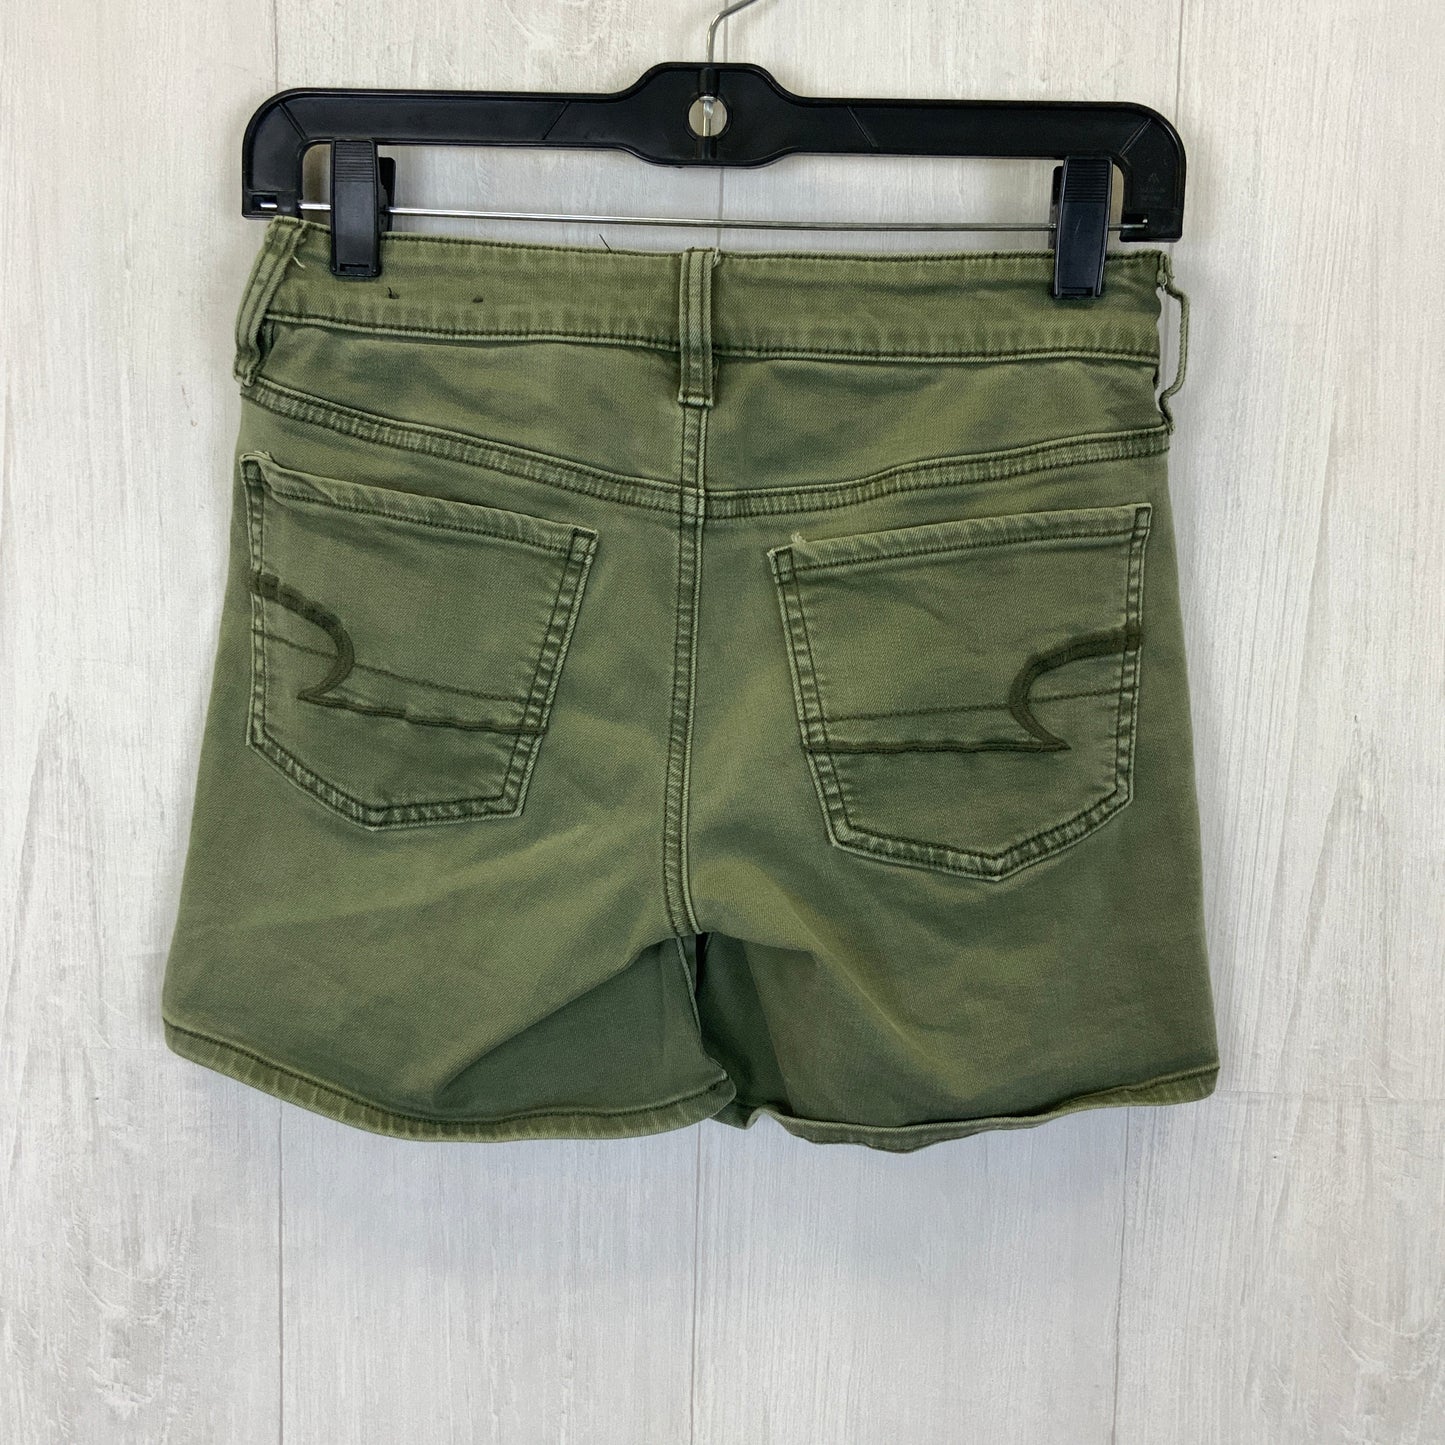 Green Shorts American Eagle, Size 0